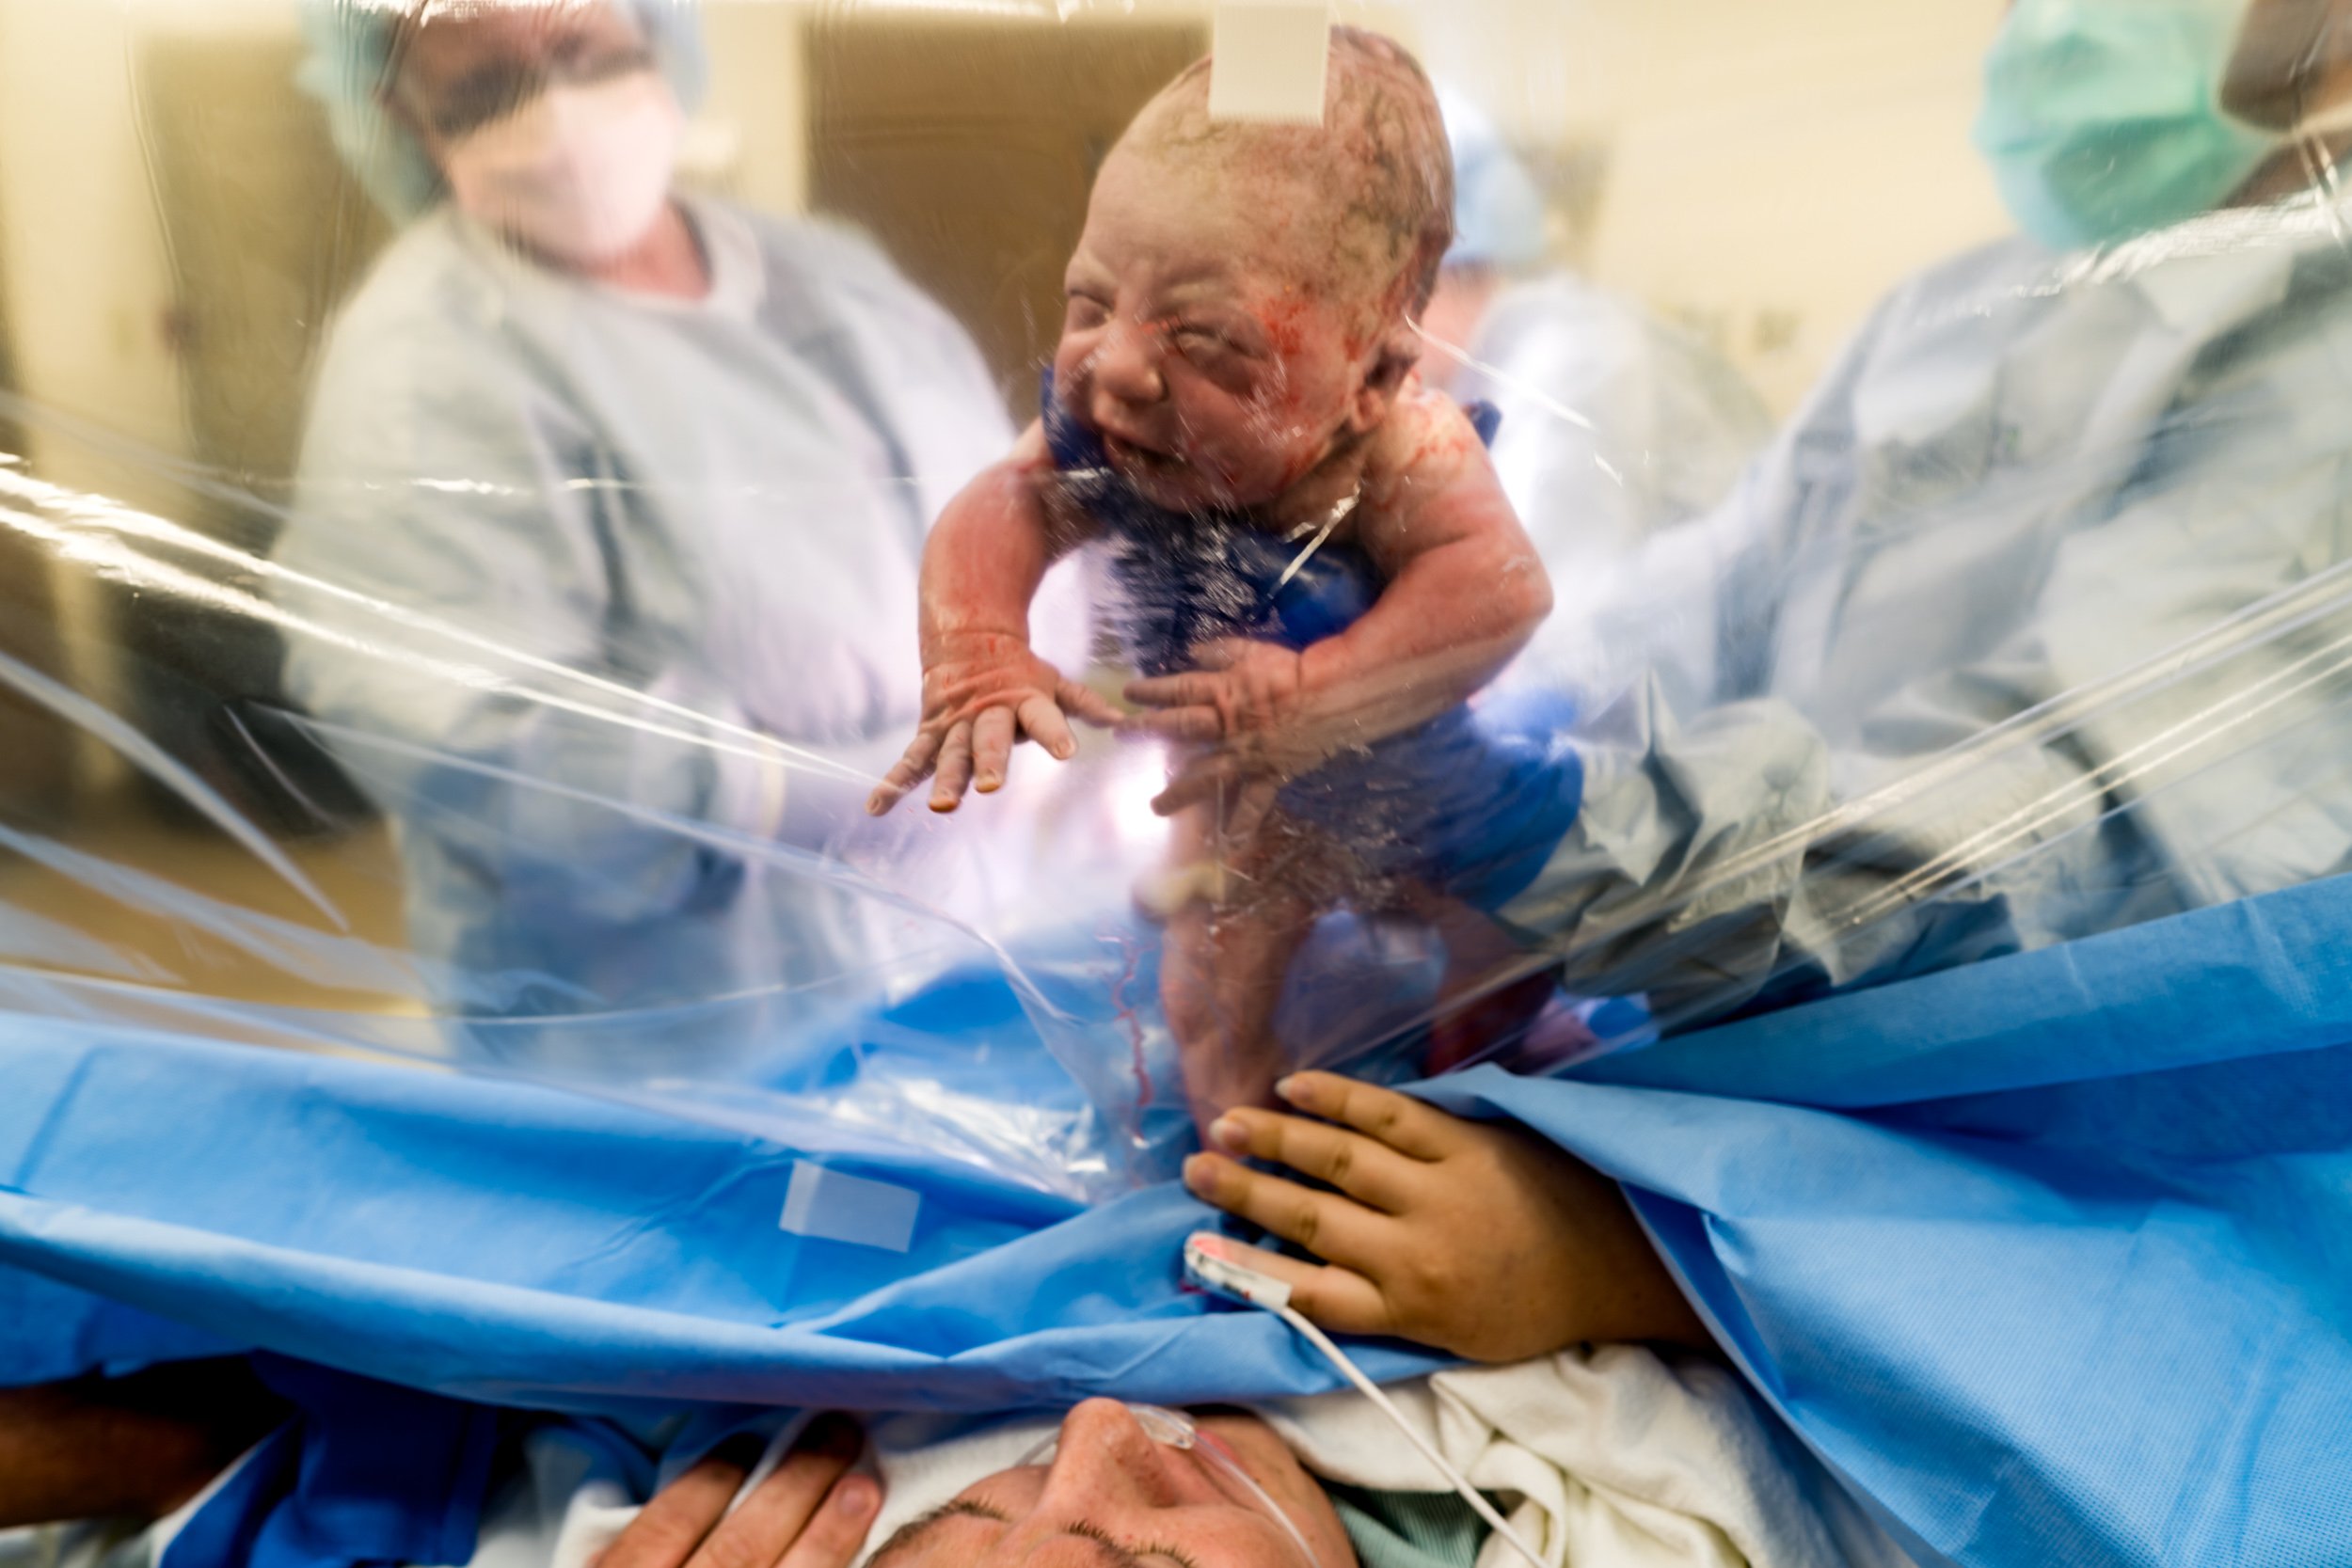 newborn baby being held up to clear drape after cesarean birth